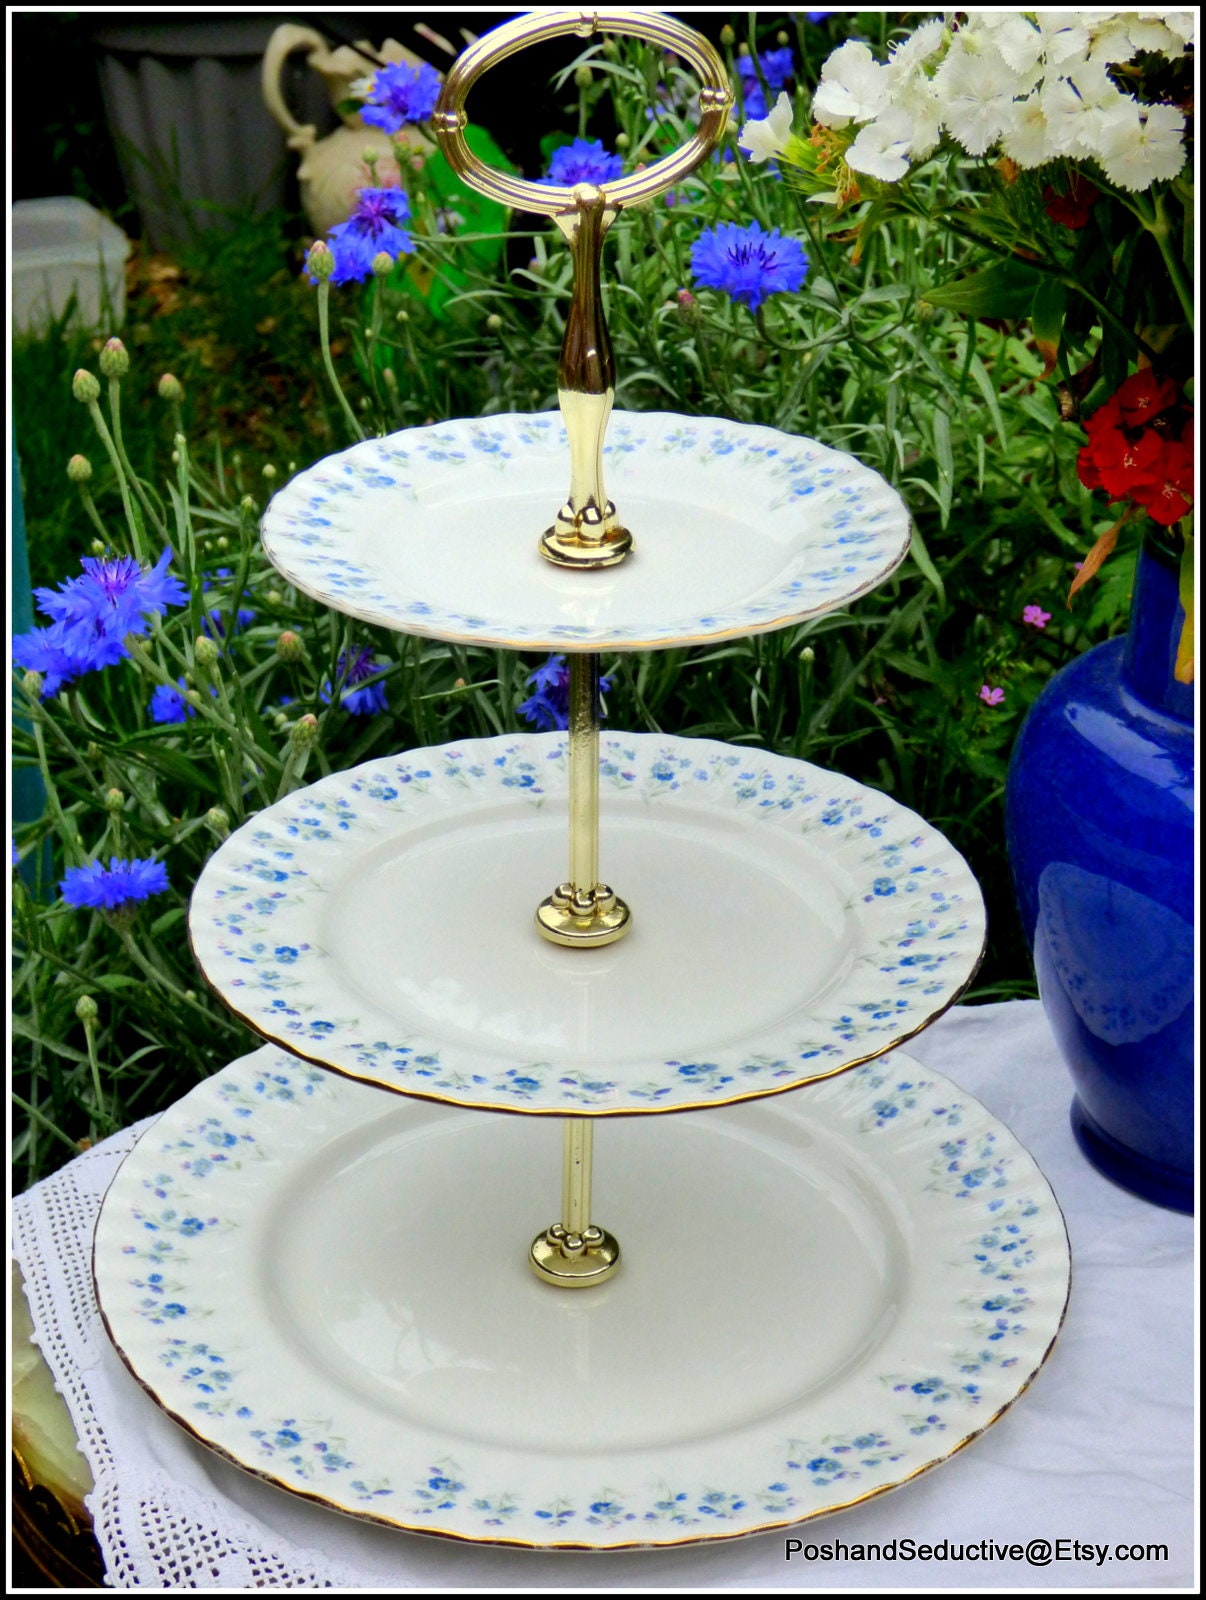 Handled Cake Plate Dessert Tray Royal Albert Forget Me Not 3 Tier Cake Plate